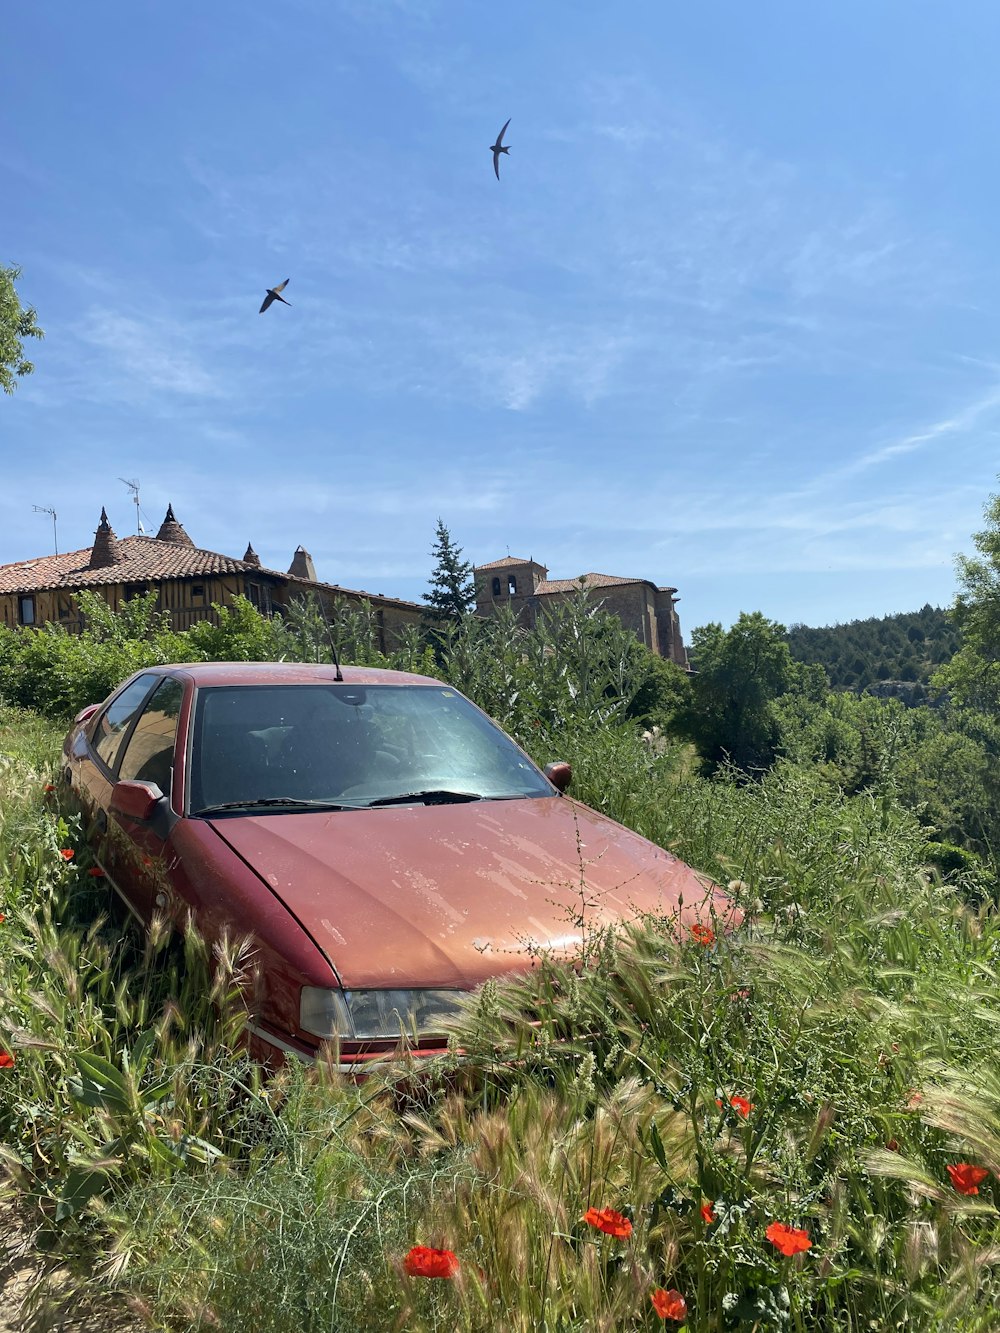 a car parked in a grassy field with birds flying around